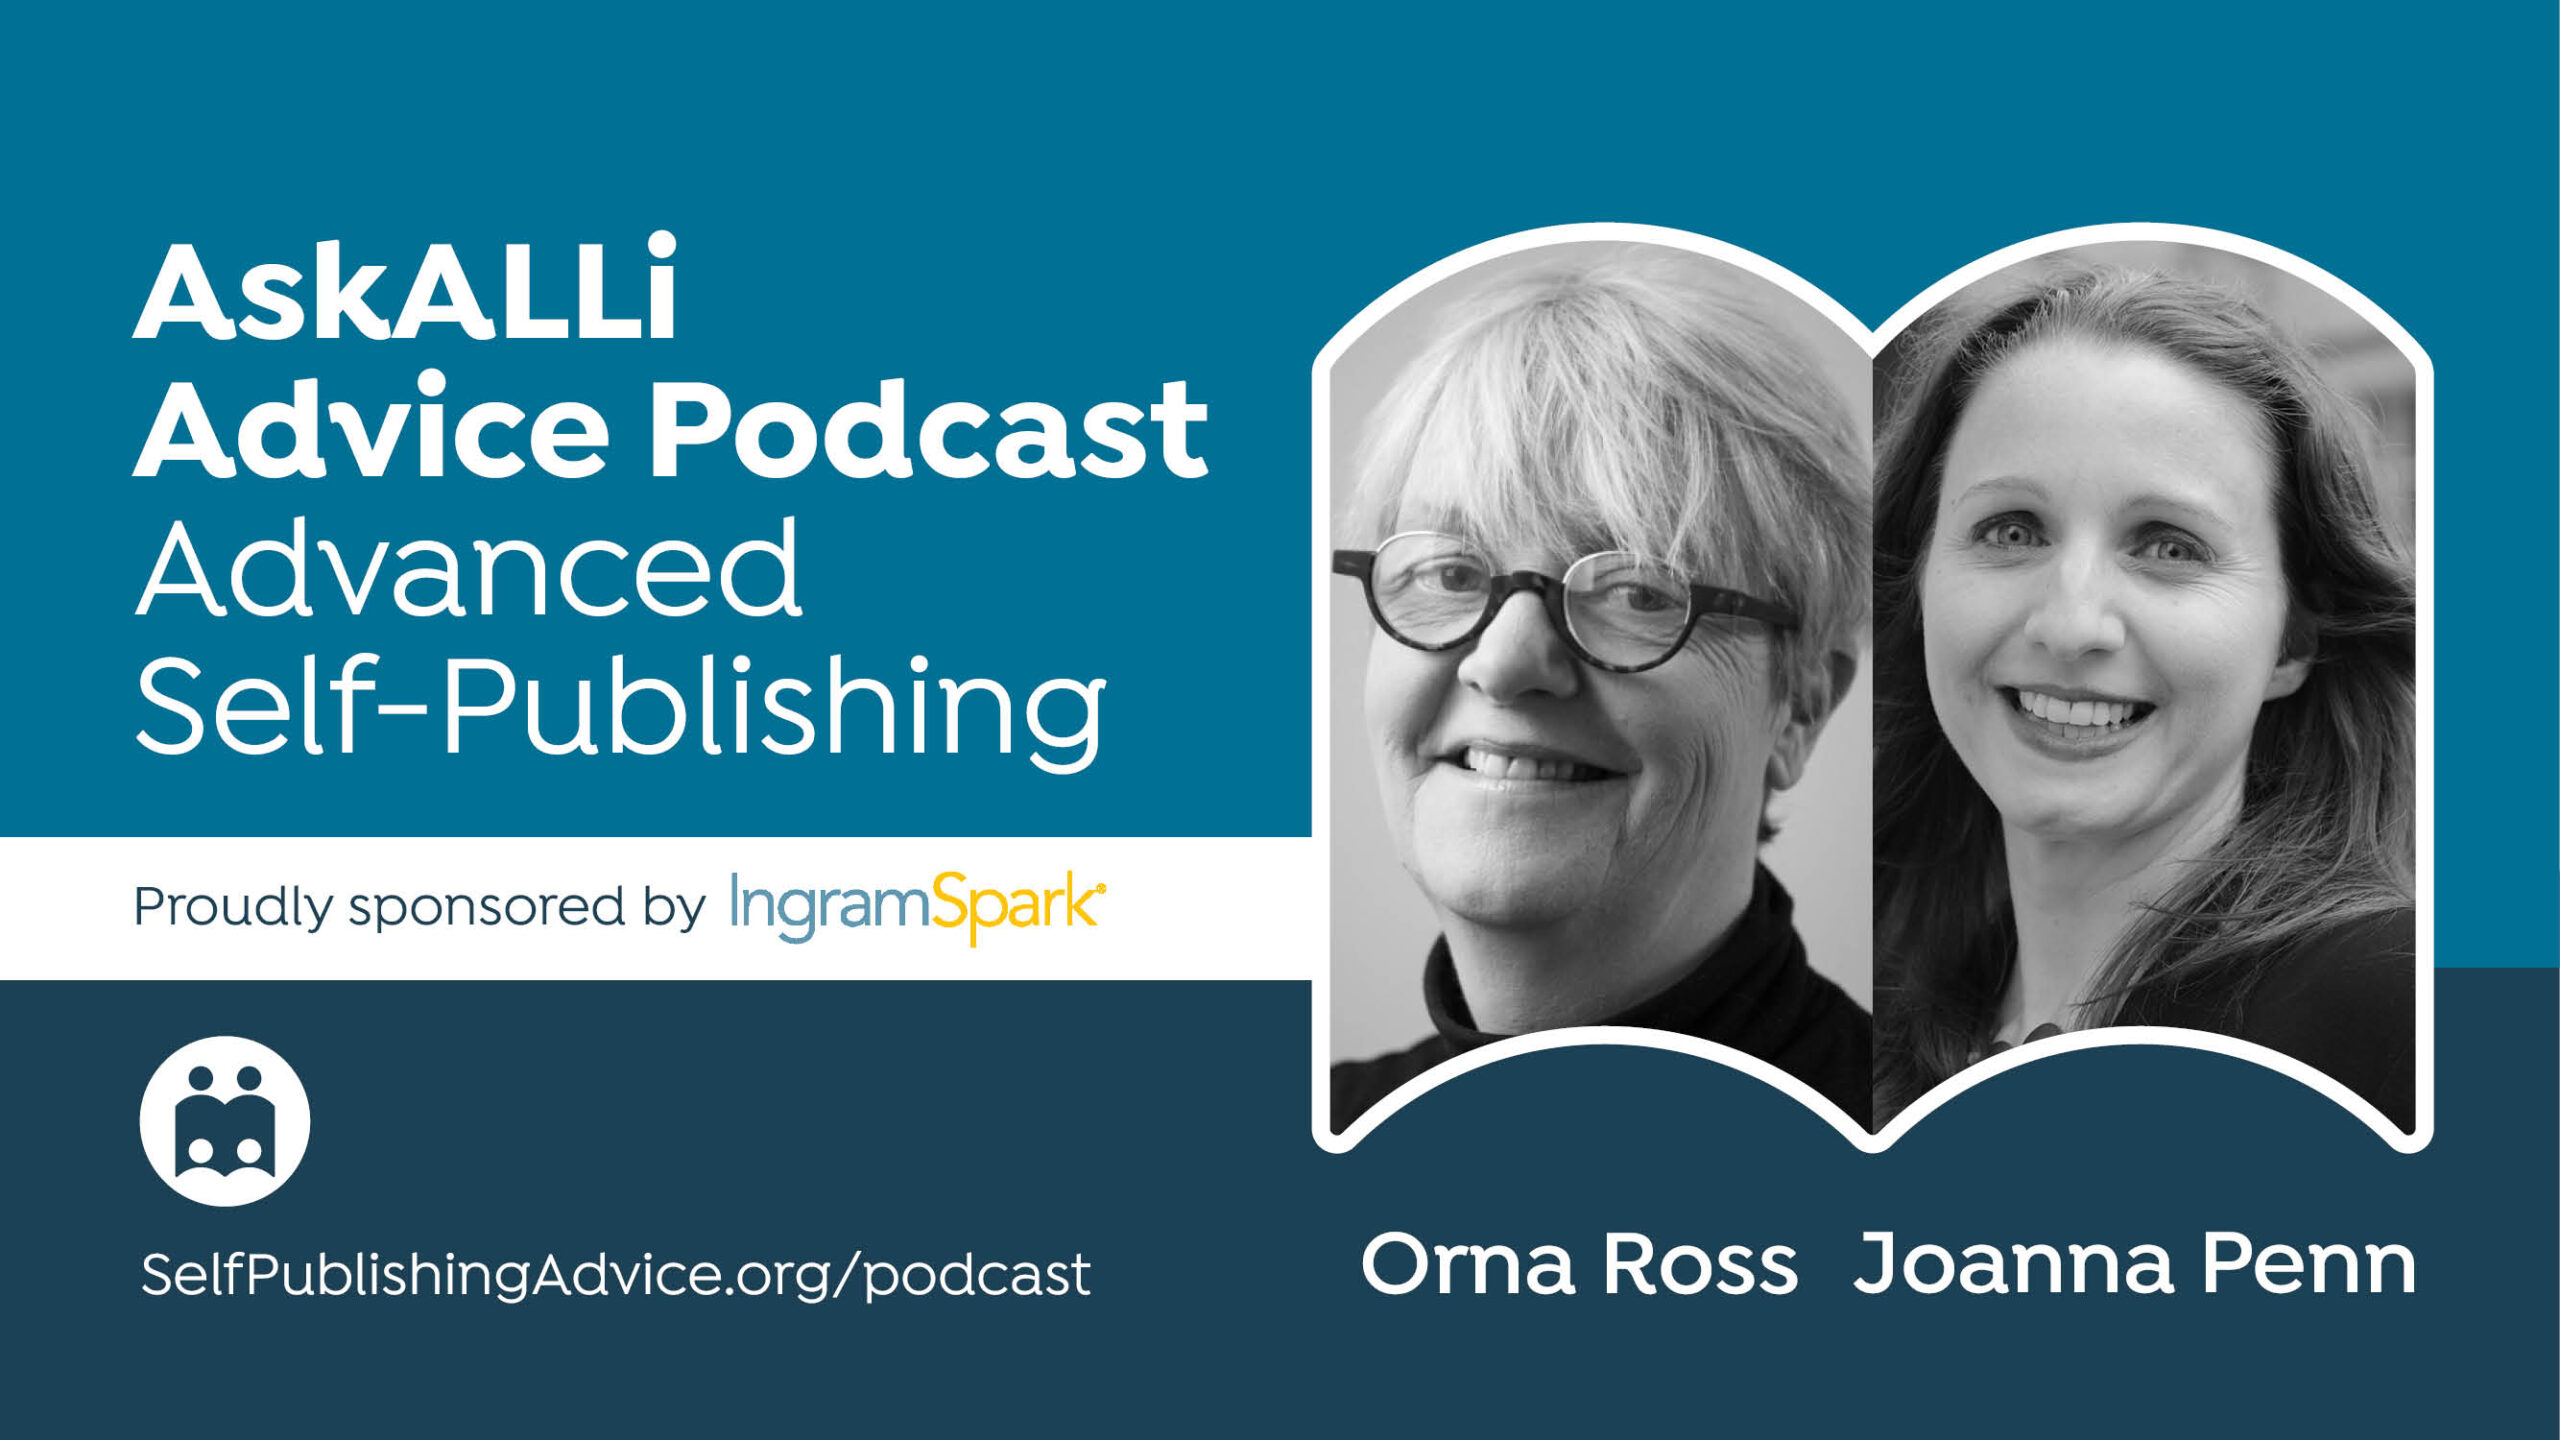 PODCAST: Developing Your Personal Brand As An Author